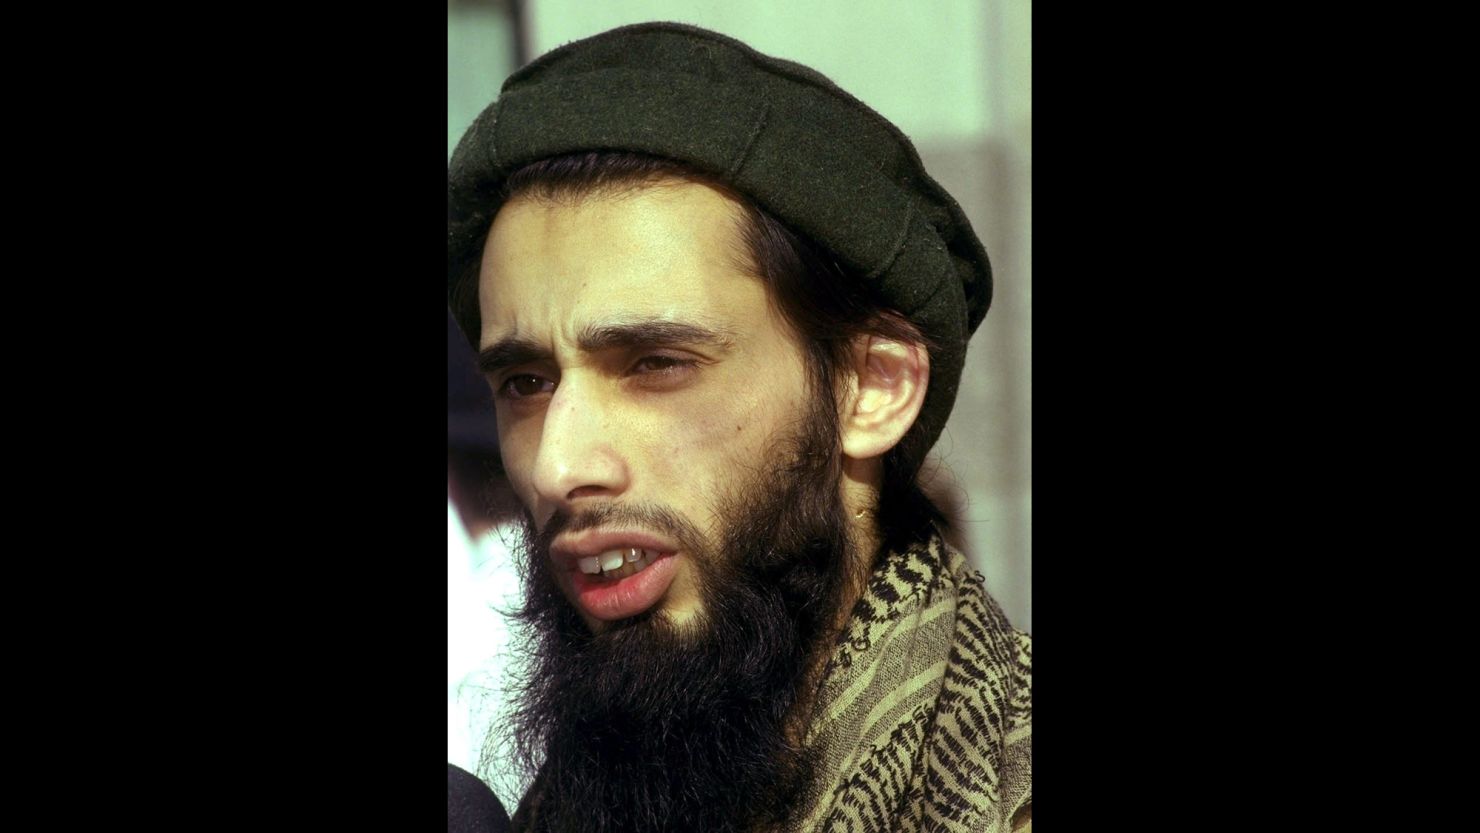 Haroon Rashid Aswat, seen in this 2005 file photo, will be extradited to the U.S. in connection with a jihad training camp.